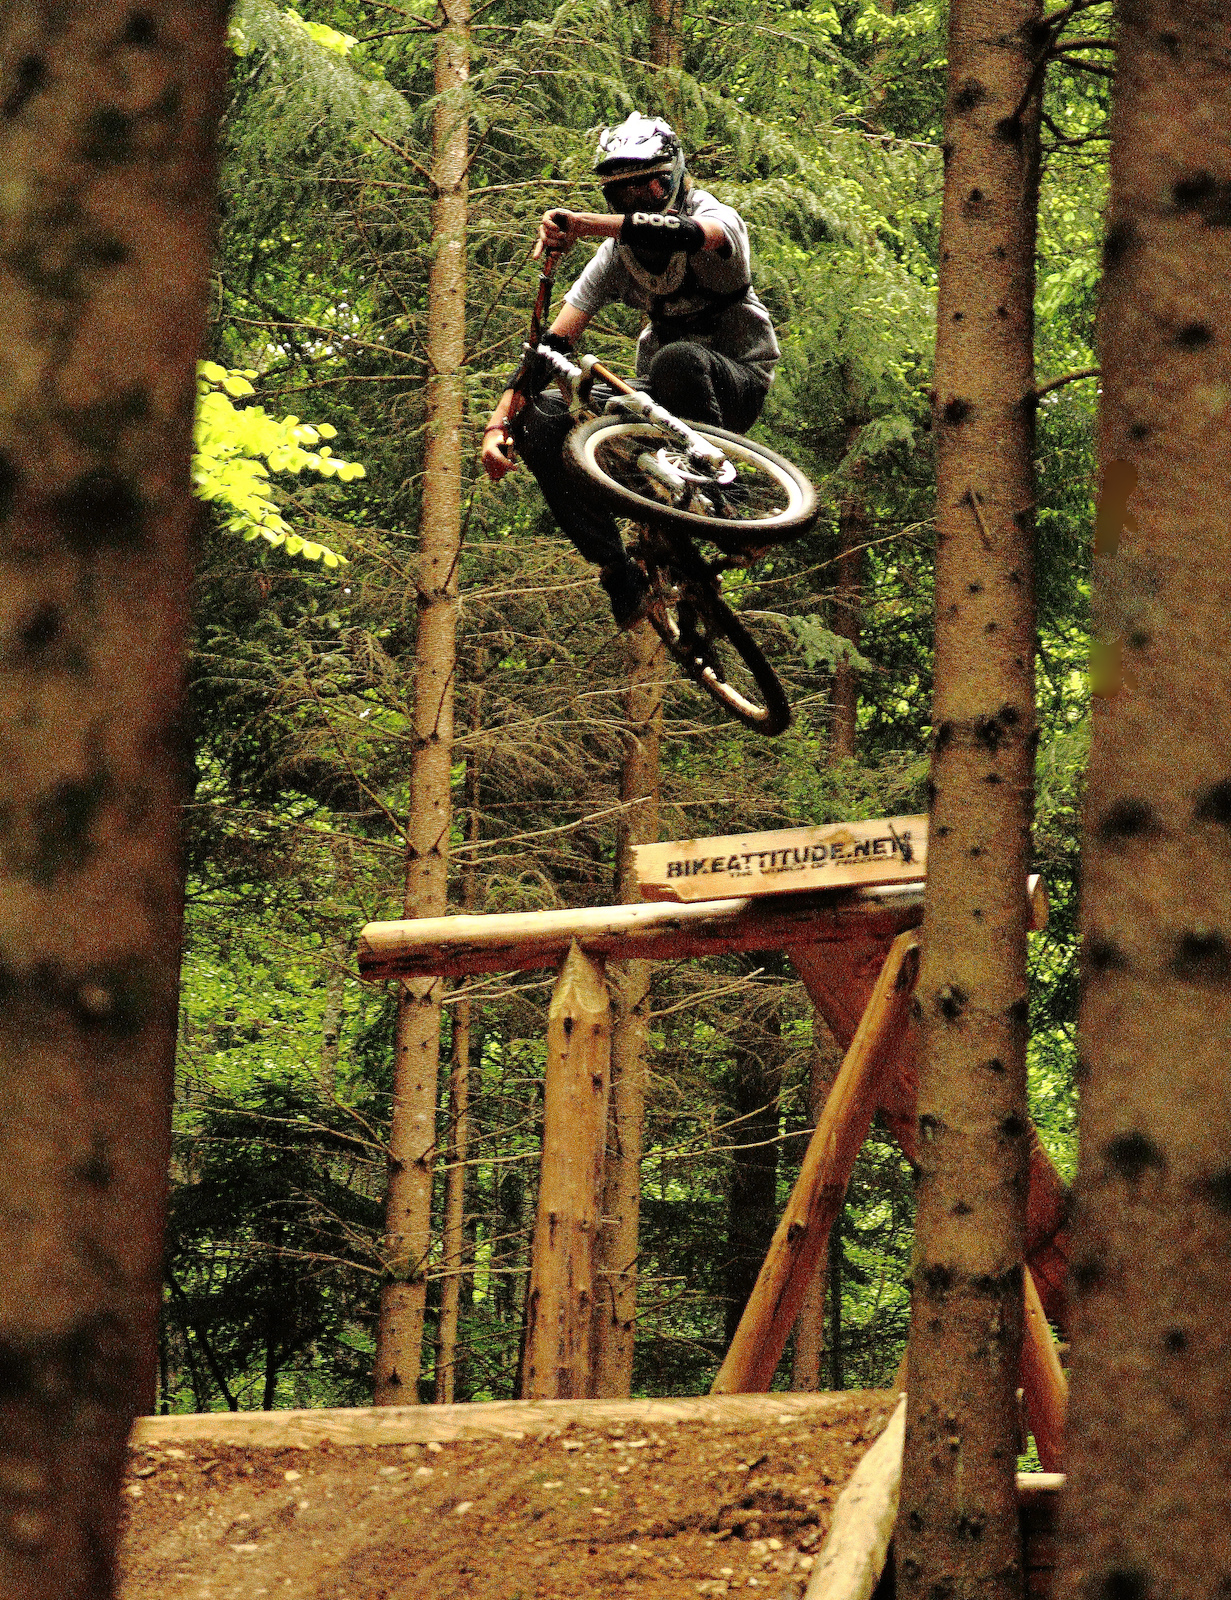 Motocross on the Log at Chaumont ! 

Canon 550D